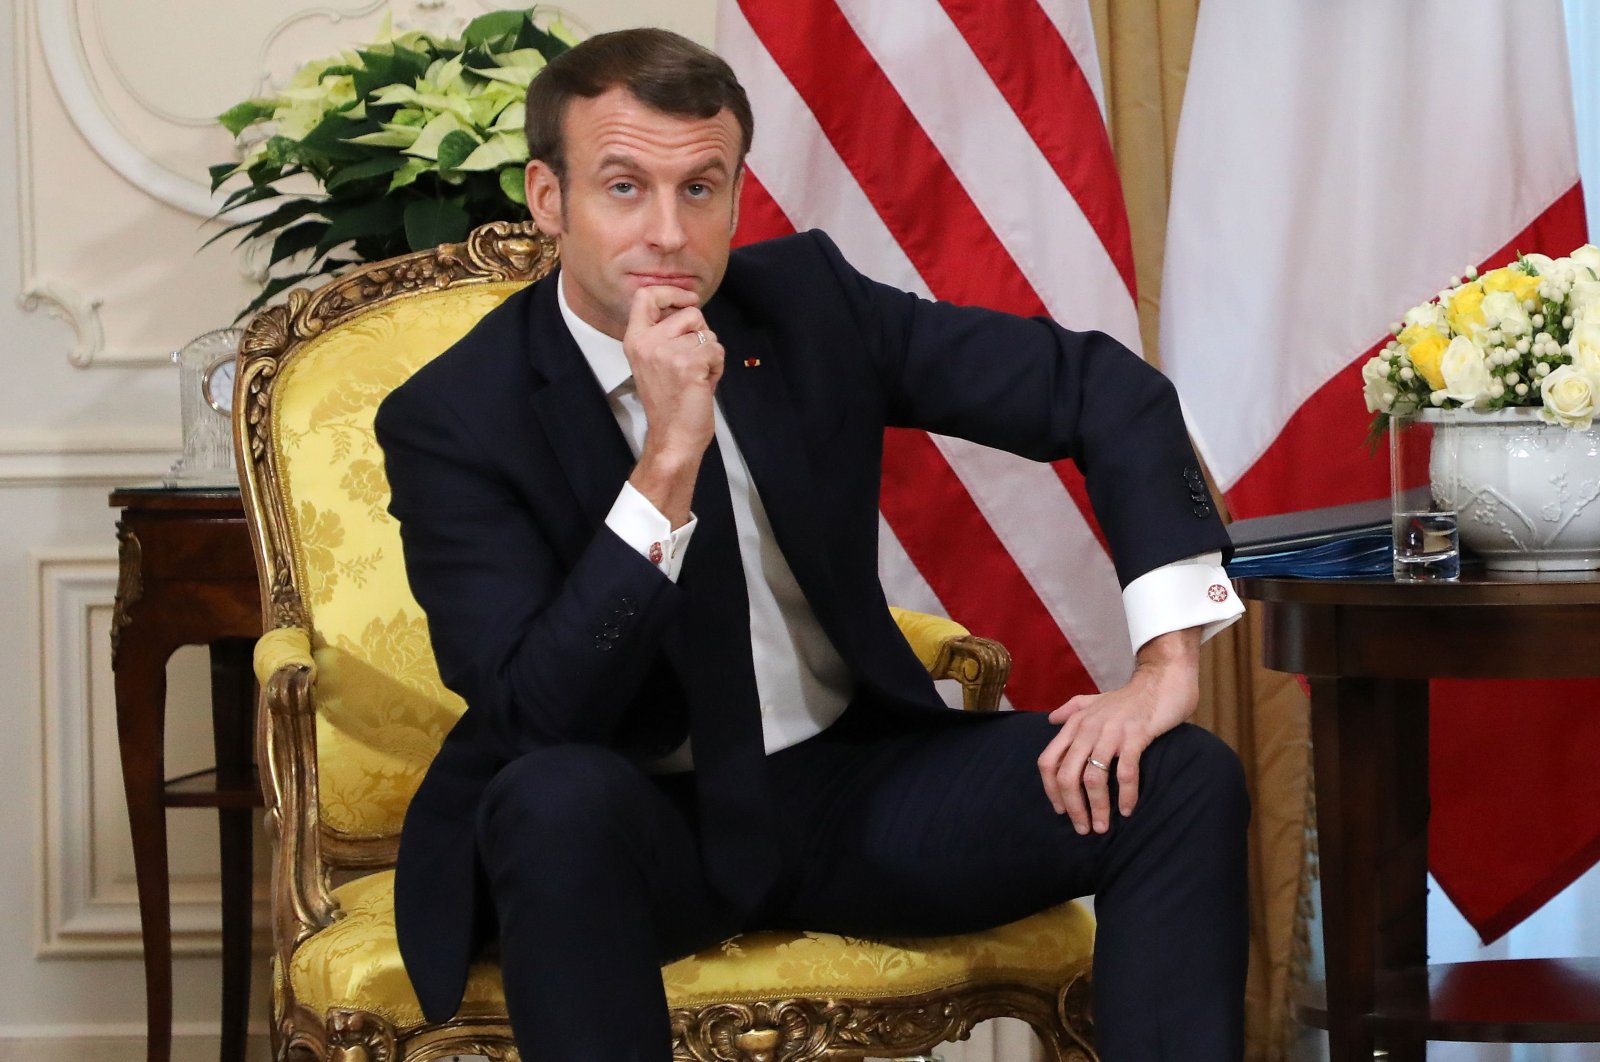 France's President Emmanuel Macron reacts as he talks with U.S. President Donald Trump during their meeting at Winfield House, London on Dec. 3, 2019. (AFP Photo)